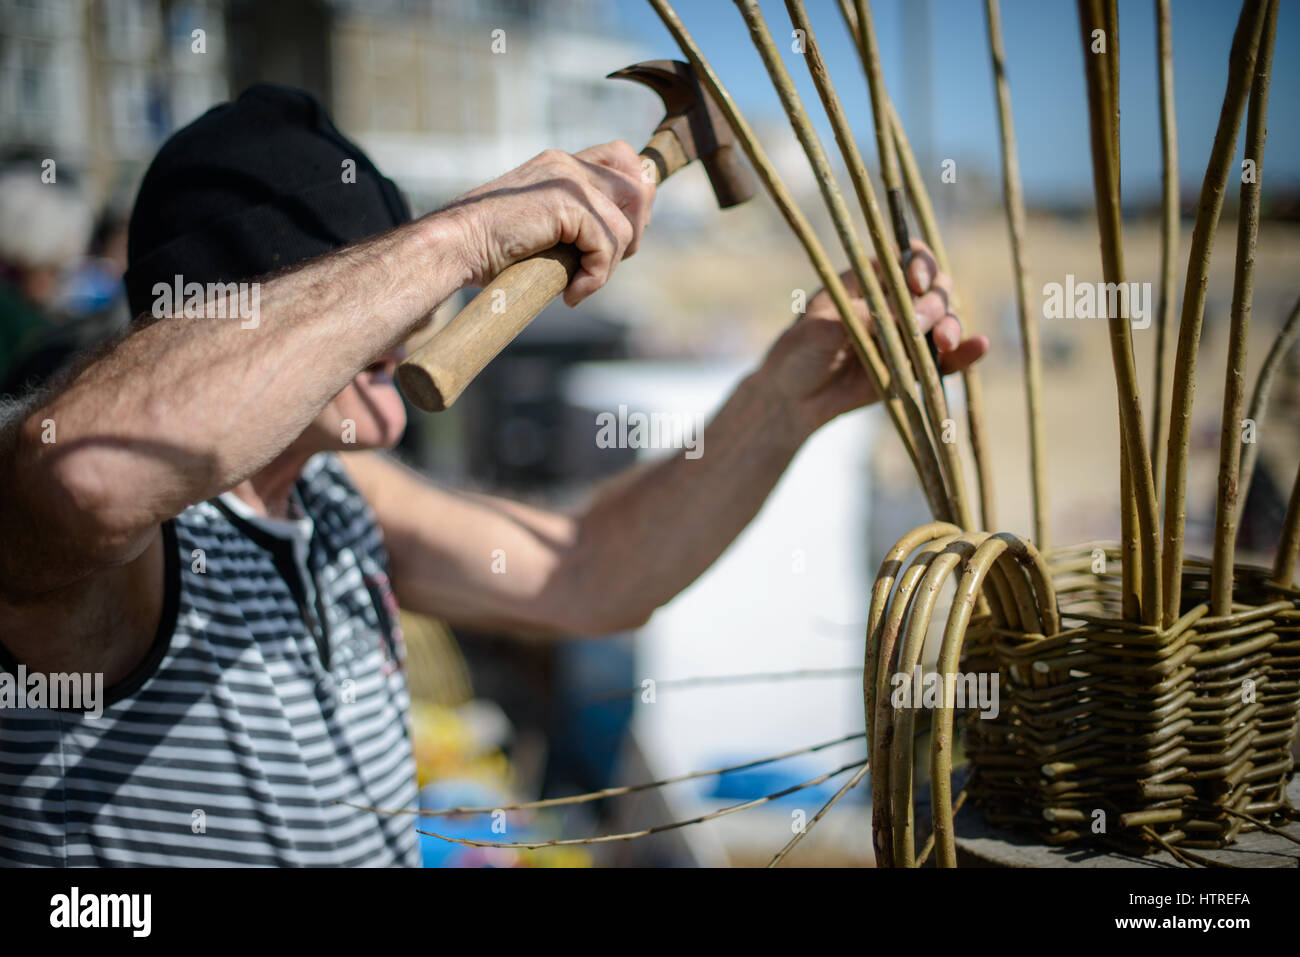 A man makes traditional cornish willow lobster pots called Withy Pots on the quayside of the harbour at St Ives, Cornwall, England, UK. Stock Photo